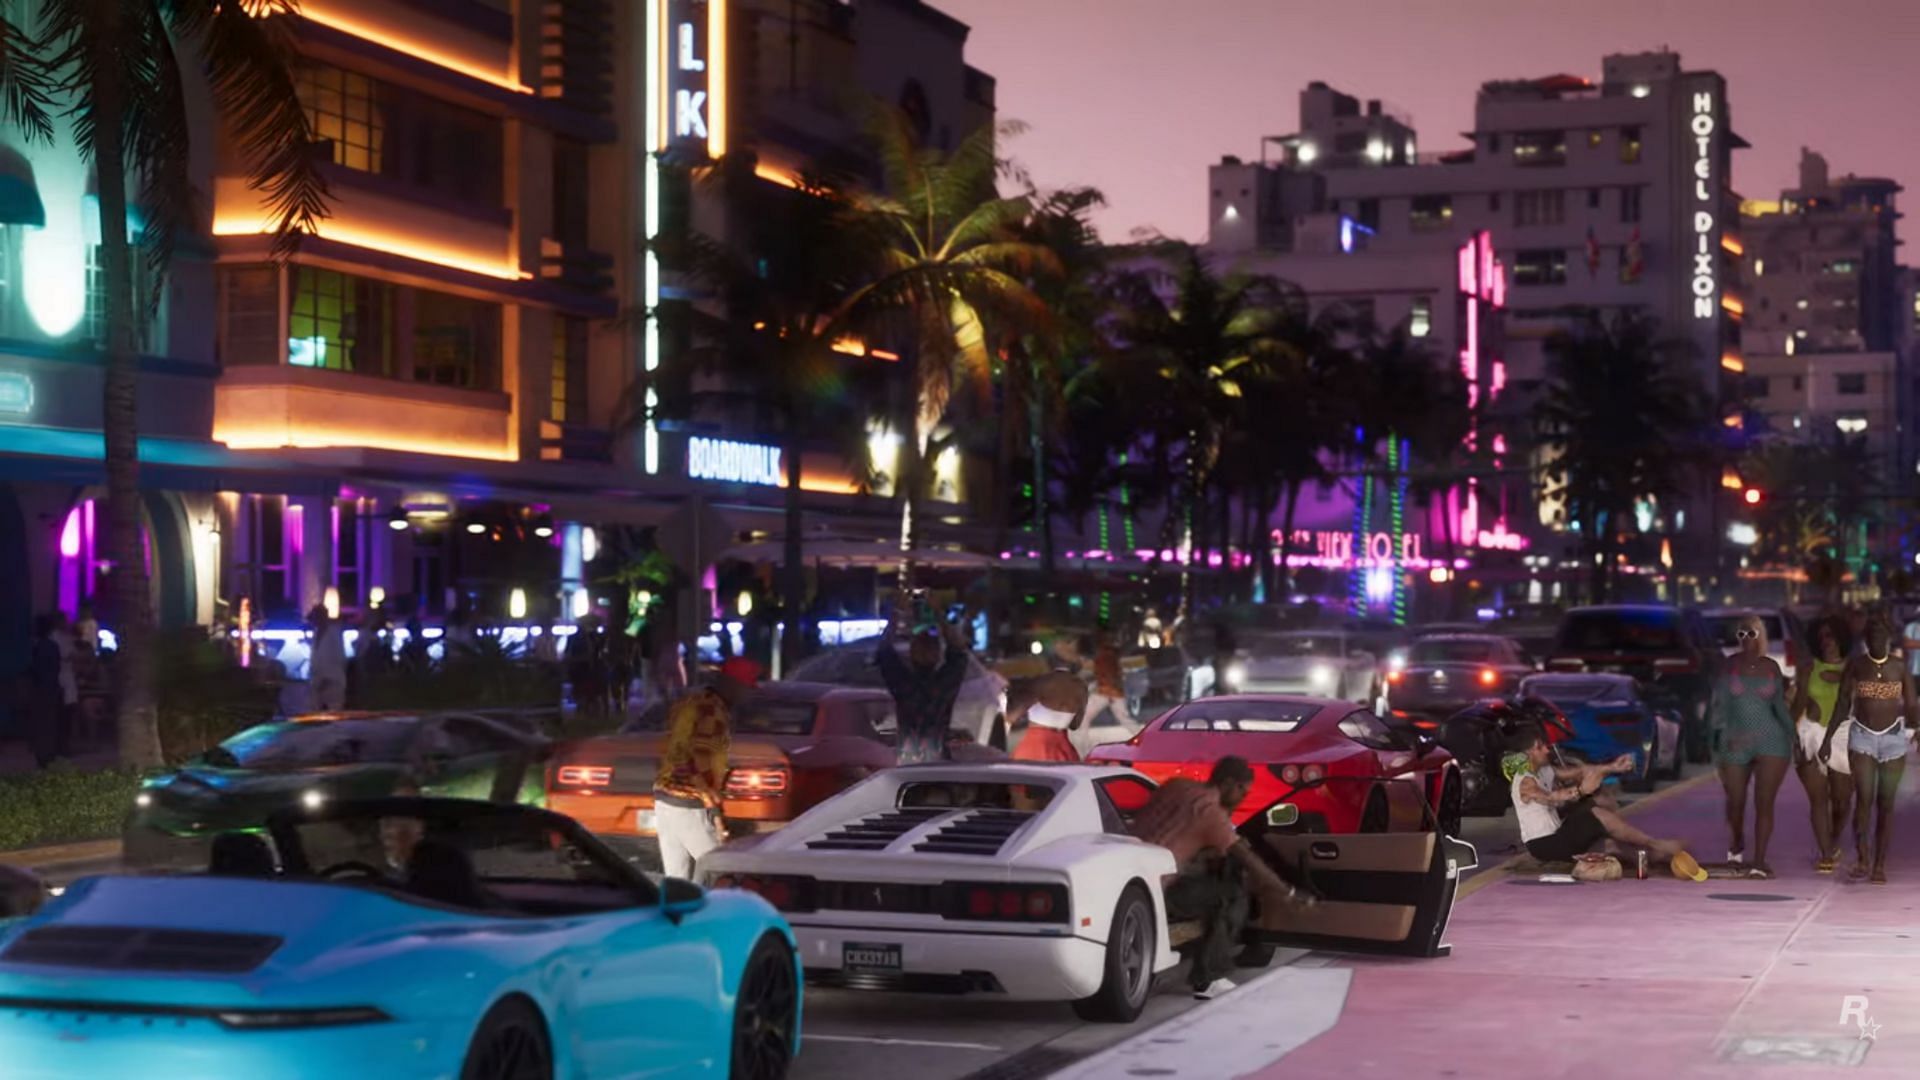 The place looks similar to Ocean Drive from the original Vice City, which had clubs (Image via Rockstar Games)